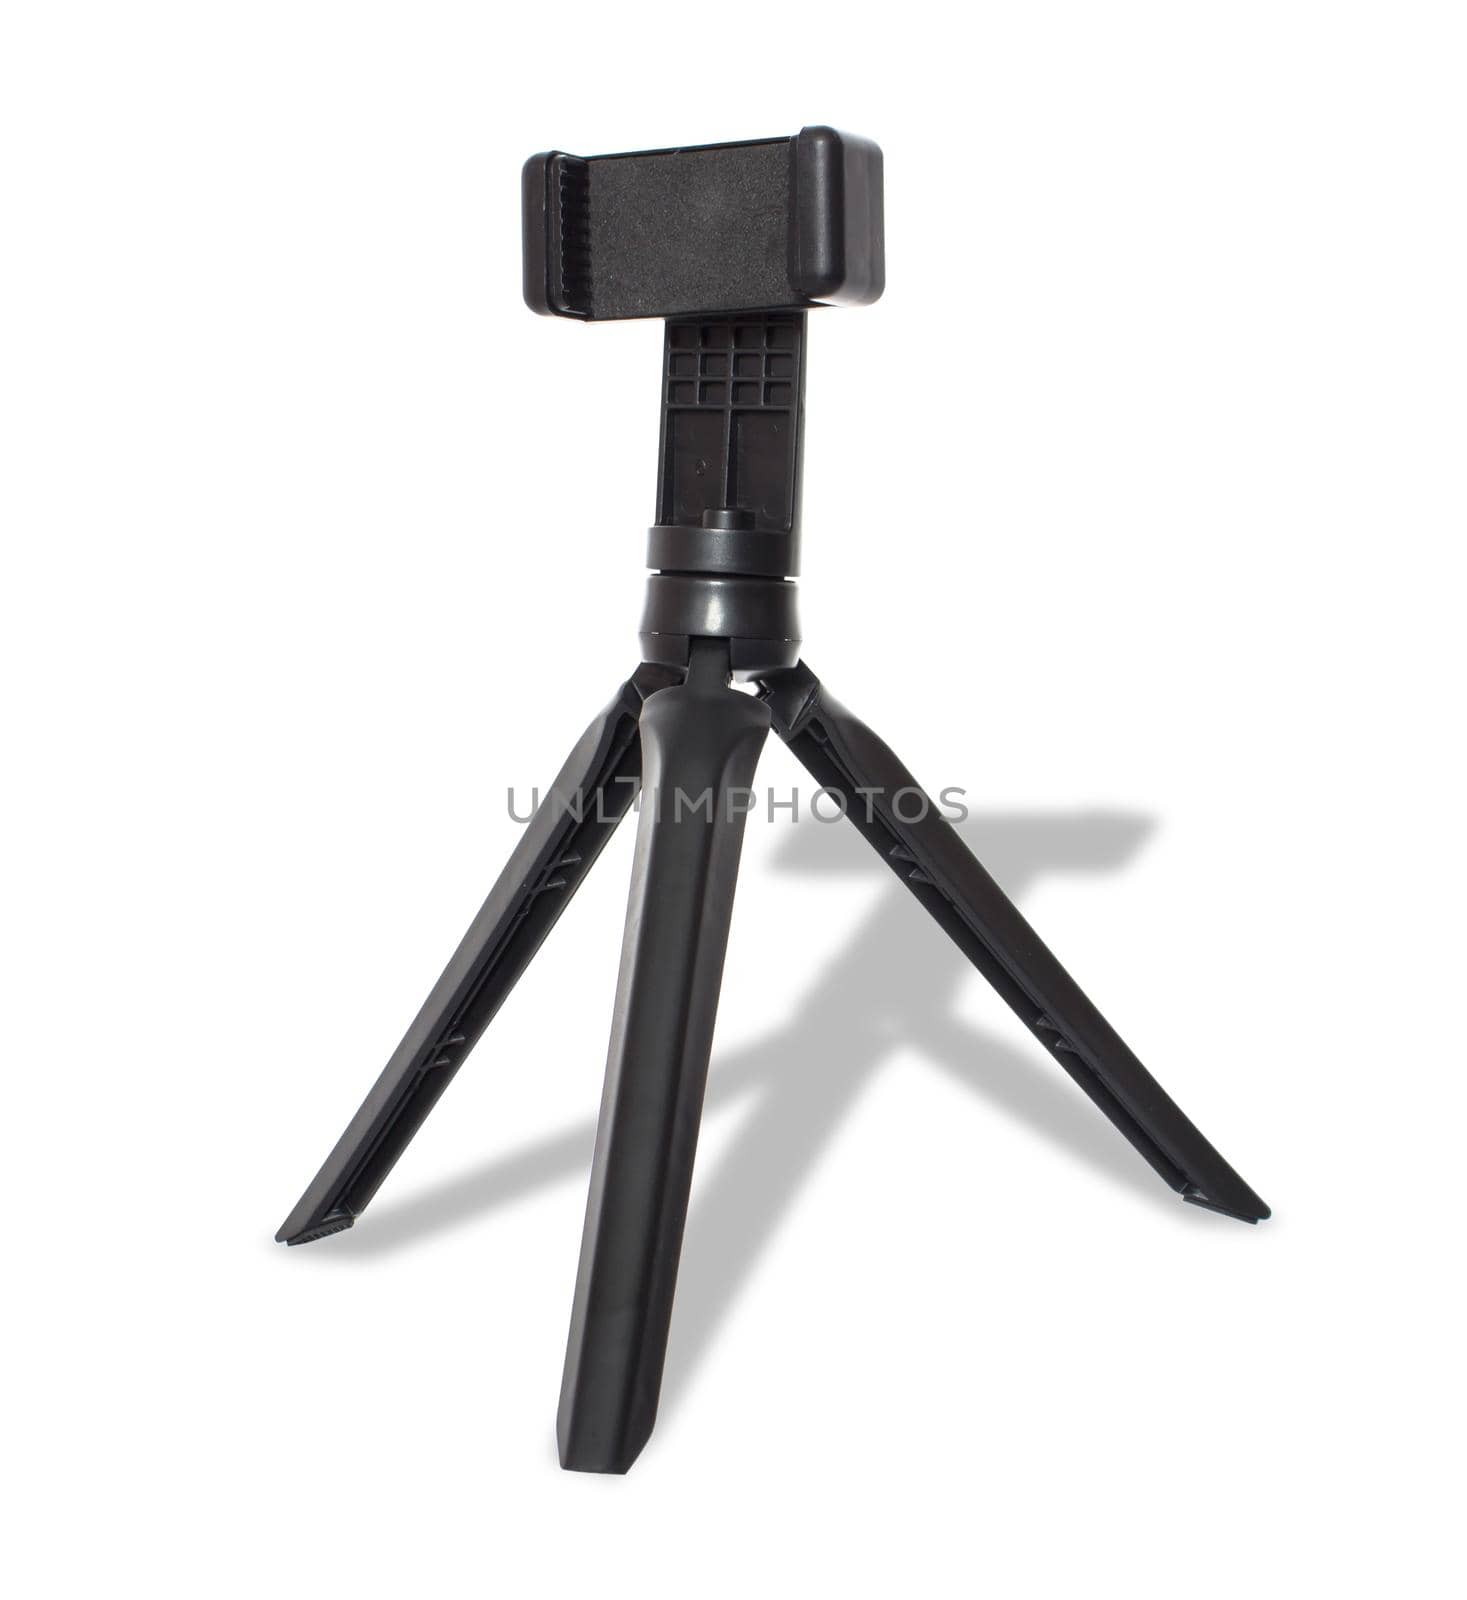 tripod for phone, mini tripod for selfie, isolated on white background by A_A